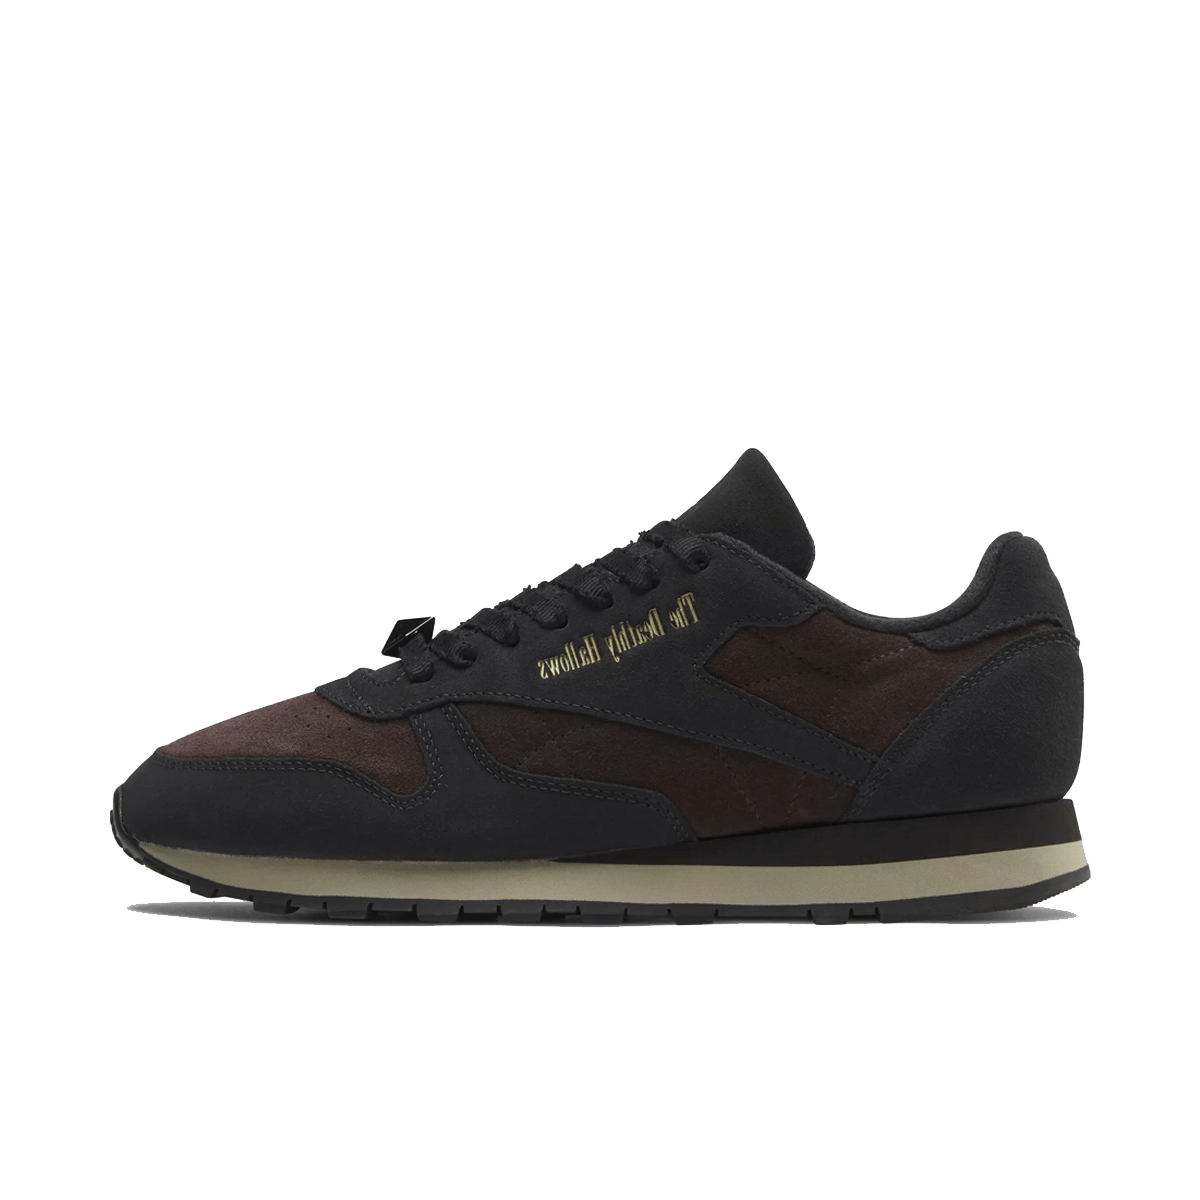 Harry Potter x Reebok Classic Leather 'The Deathly Hallows'